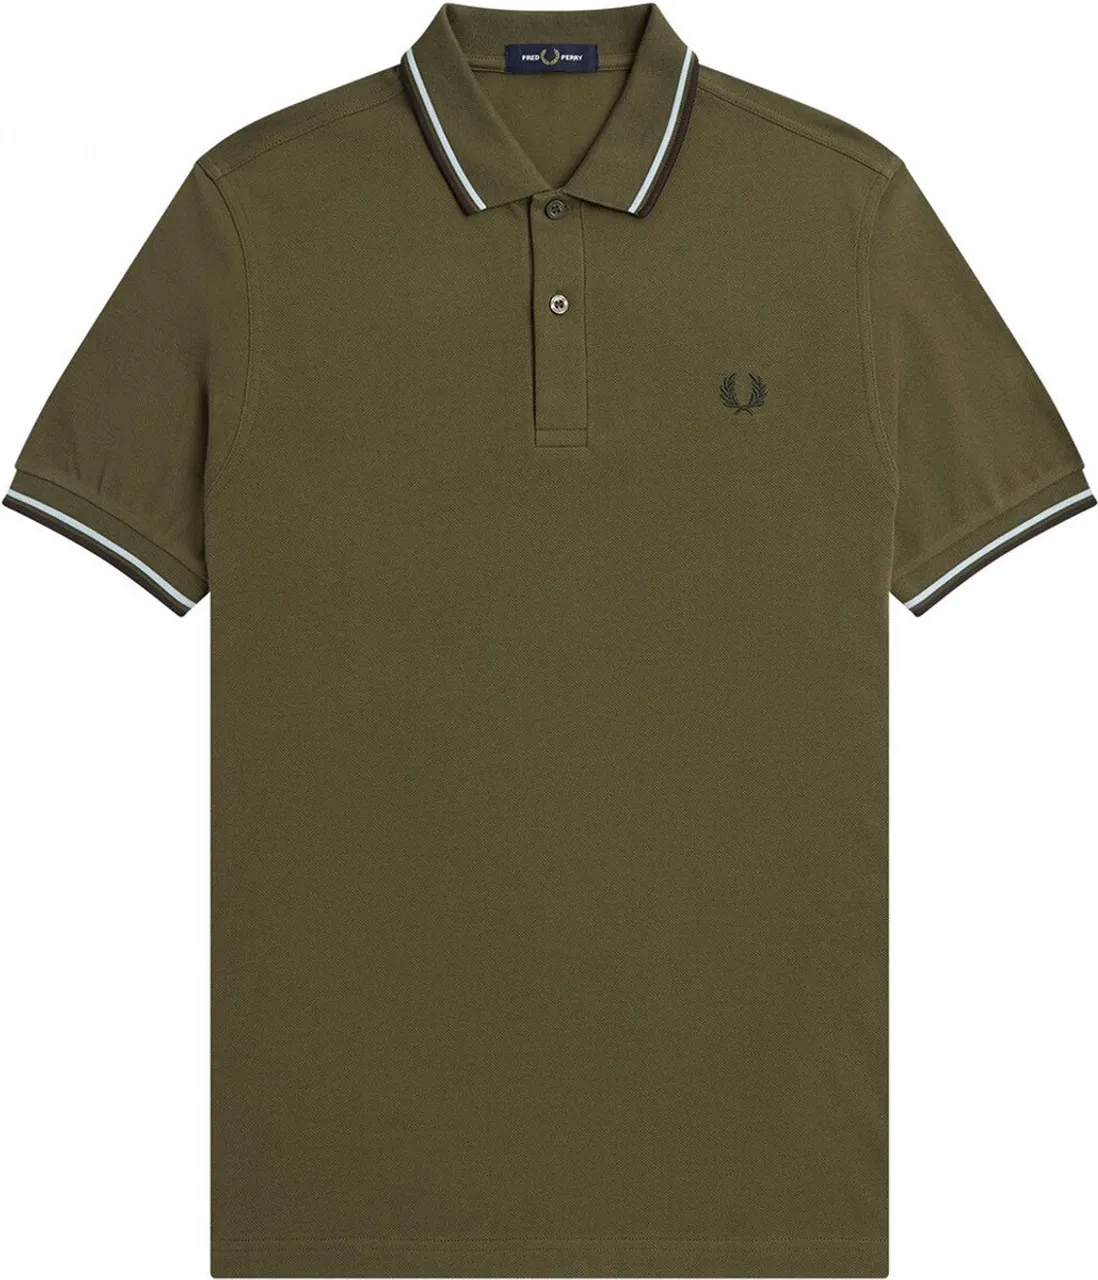 Fred Perry - Polo Donkergroen M3600 - Slim-fit - Heren Poloshirt